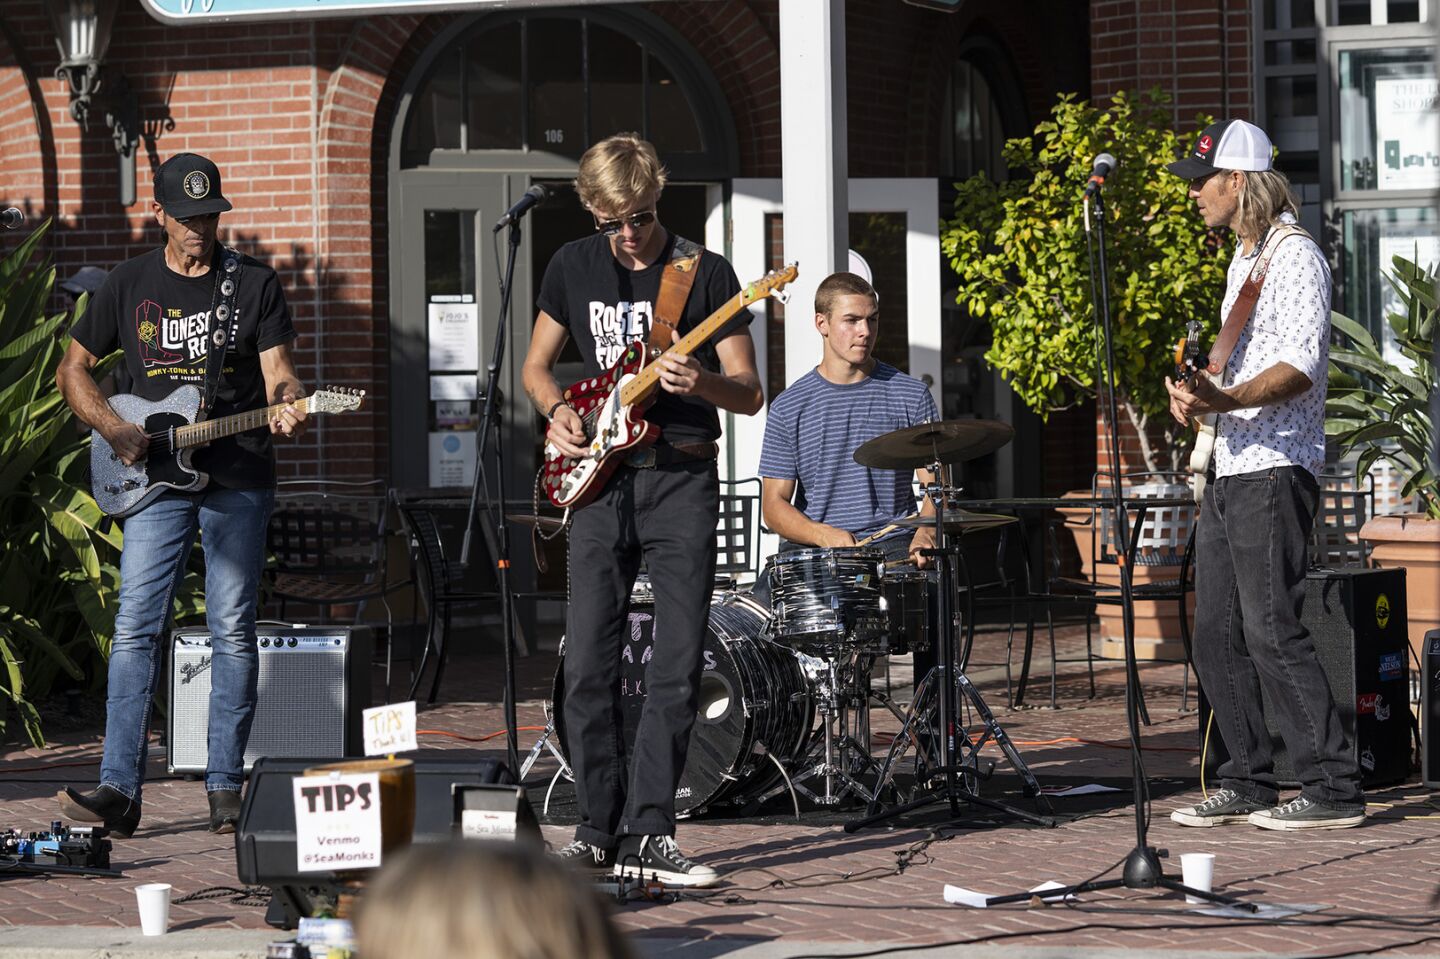 The Sea Monks performed at the Lumberyard Shopping Center